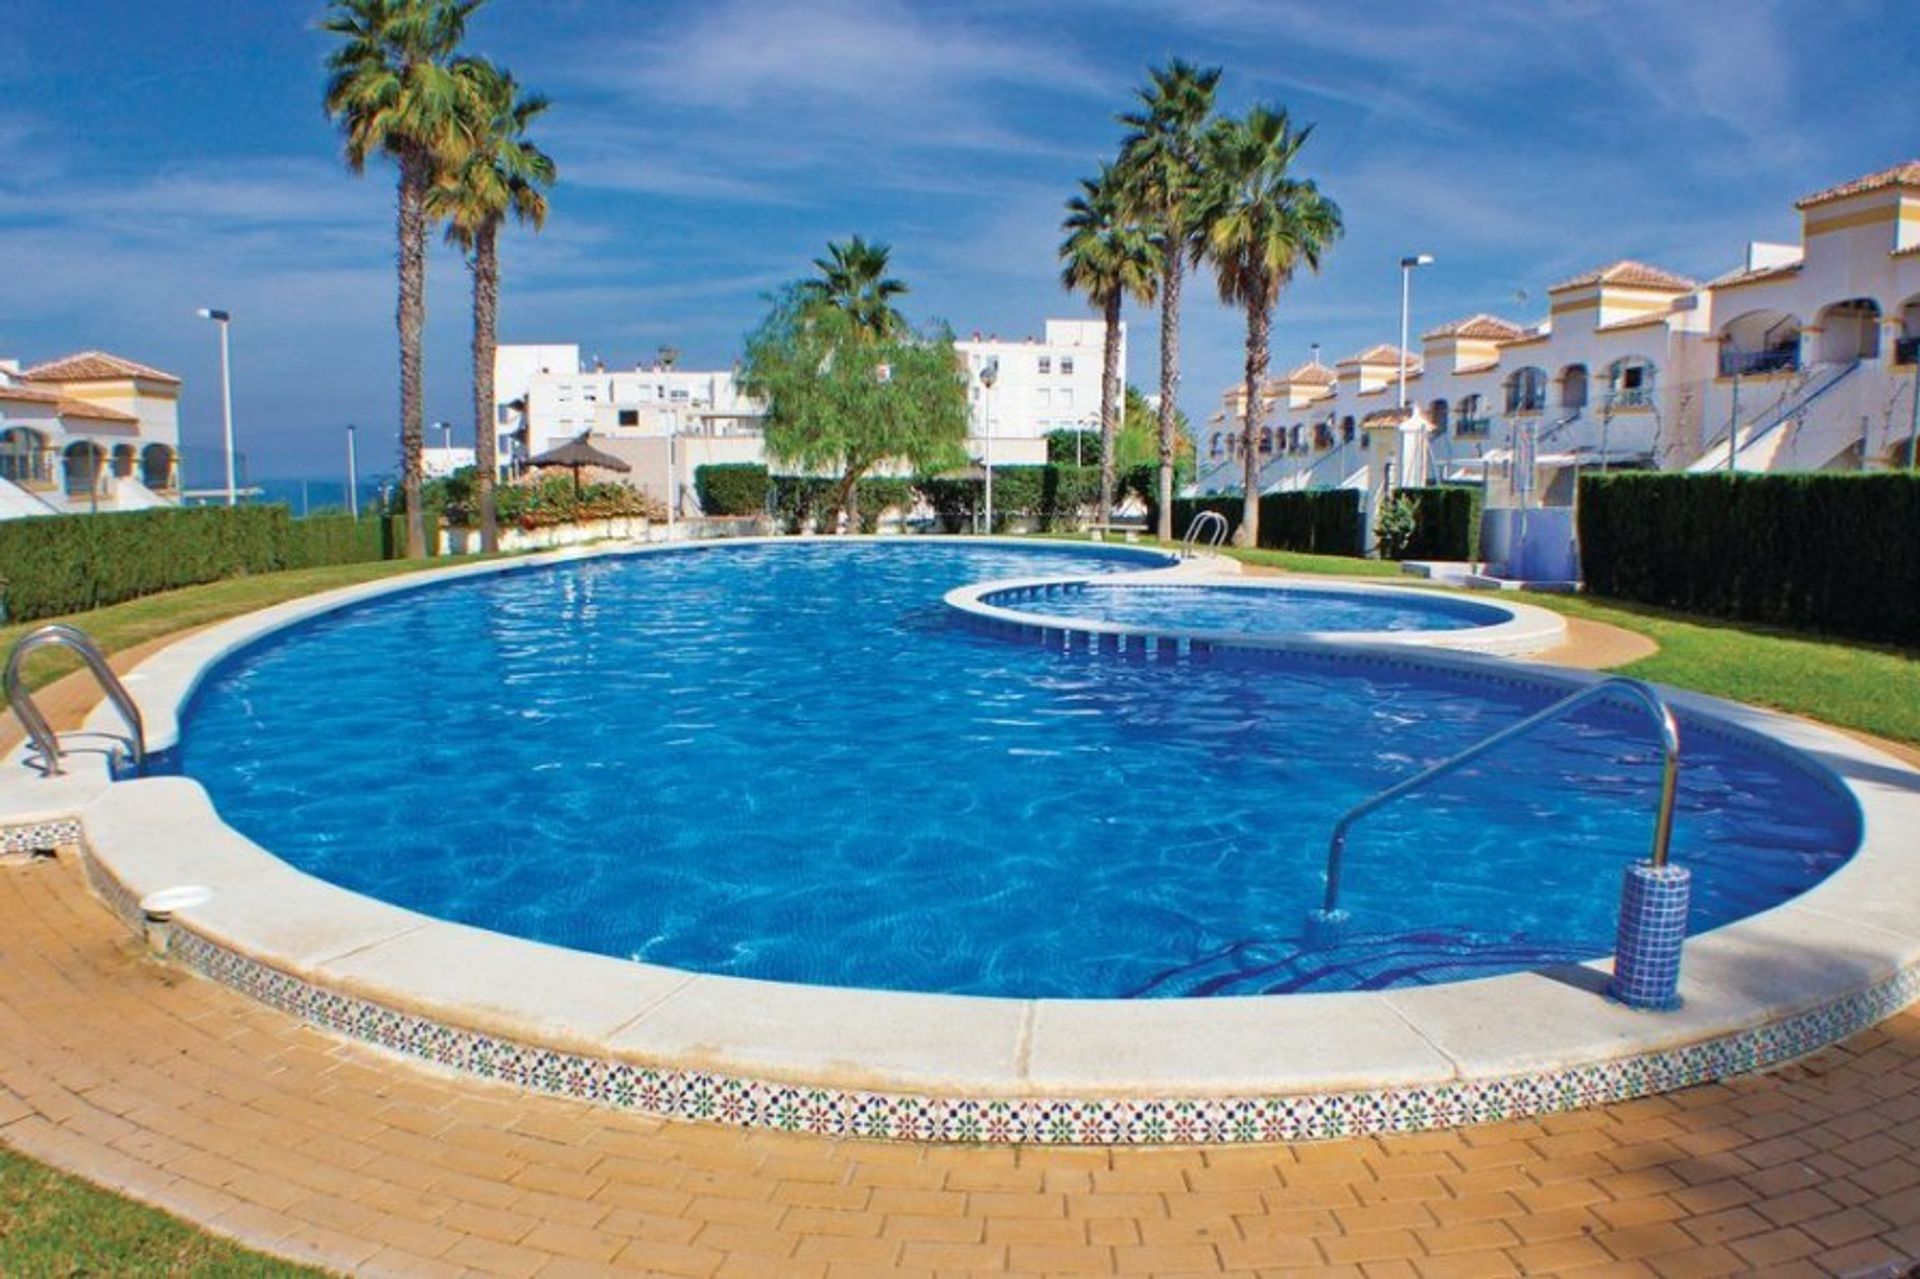 Make the most of our properties in Gran Alacant, with rentals by the beach, golf and attractions